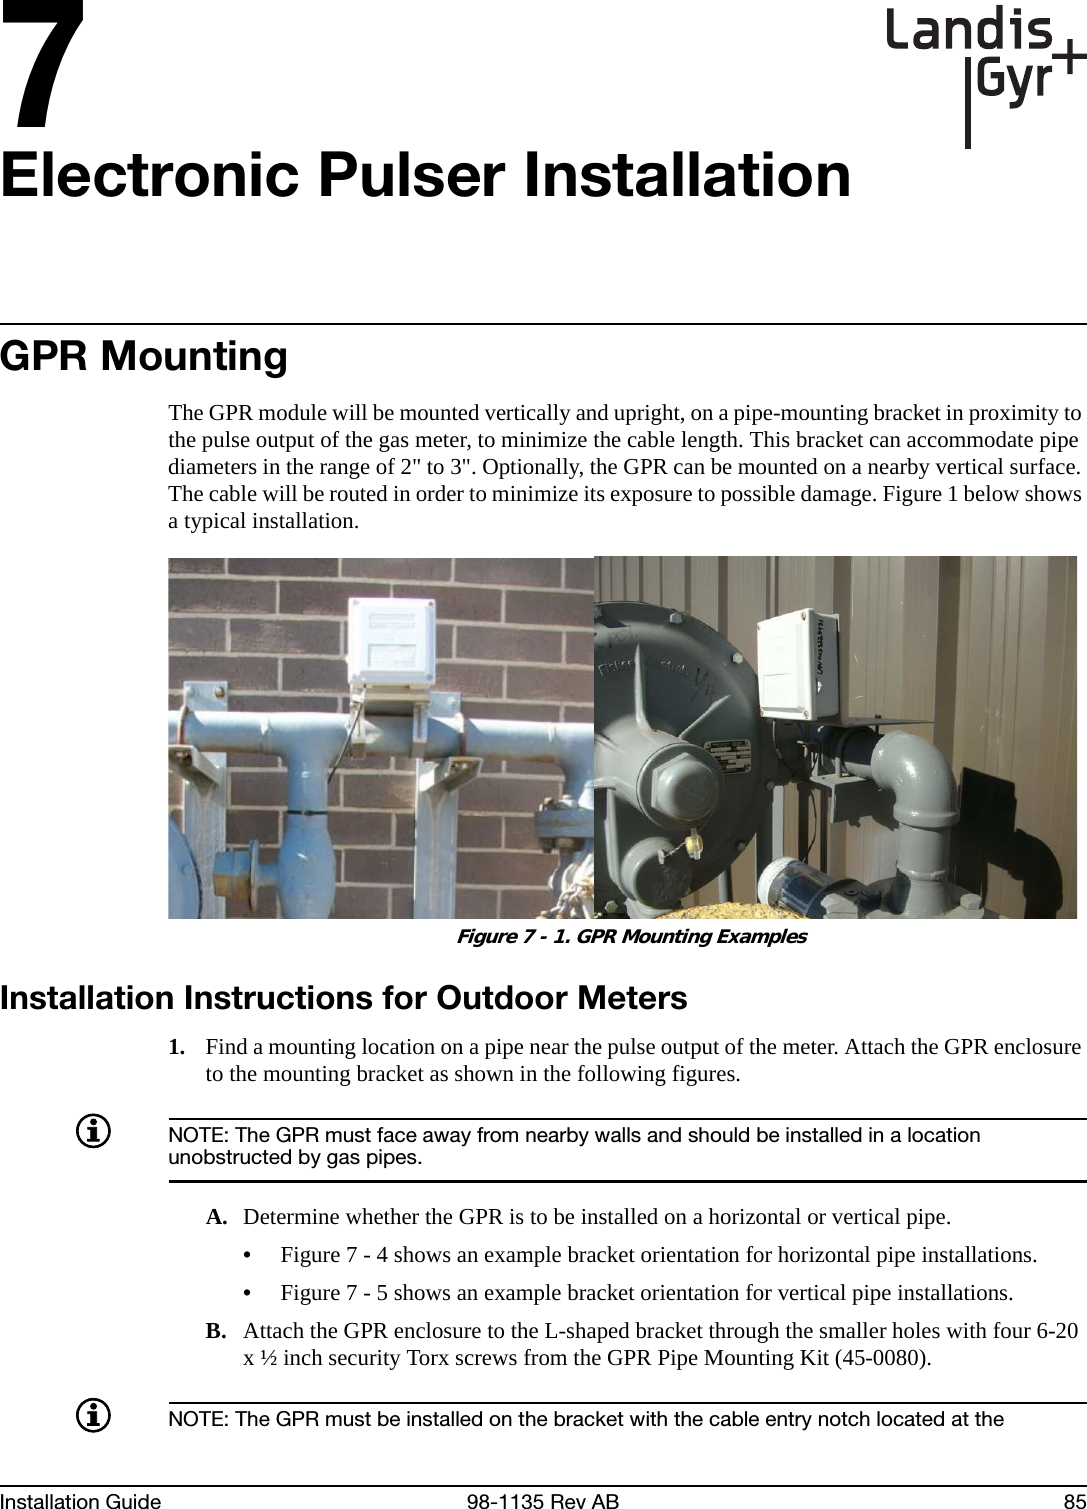 7Installation Guide 98-1135 Rev AB 85Electronic Pulser InstallationGPR MountingThe GPR module will be mounted vertically and upright, on a pipe-mounting bracket in proximity to the pulse output of the gas meter, to minimize the cable length. This bracket can accommodate pipe diameters in the range of 2&quot; to 3&quot;. Optionally, the GPR can be mounted on a nearby vertical surface. The cable will be routed in order to minimize its exposure to possible damage. Figure 1 below shows a typical installation. Figure 7 - 1. GPR Mounting ExamplesInstallation Instructions for Outdoor Meters1. Find a mounting location on a pipe near the pulse output of the meter. Attach the GPR enclosure to the mounting bracket as shown in the following figures.NOTE: The GPR must face away from nearby walls and should be installed in a location unobstructed by gas pipes.A. Determine whether the GPR is to be installed on a horizontal or vertical pipe.•Figure 7 - 4 shows an example bracket orientation for horizontal pipe installations.•Figure 7 - 5 shows an example bracket orientation for vertical pipe installations.B. Attach the GPR enclosure to the L-shaped bracket through the smaller holes with four 6-20 x ½ inch security Torx screws from the GPR Pipe Mounting Kit (45-0080).NOTE: The GPR must be installed on the bracket with the cable entry notch located at the 